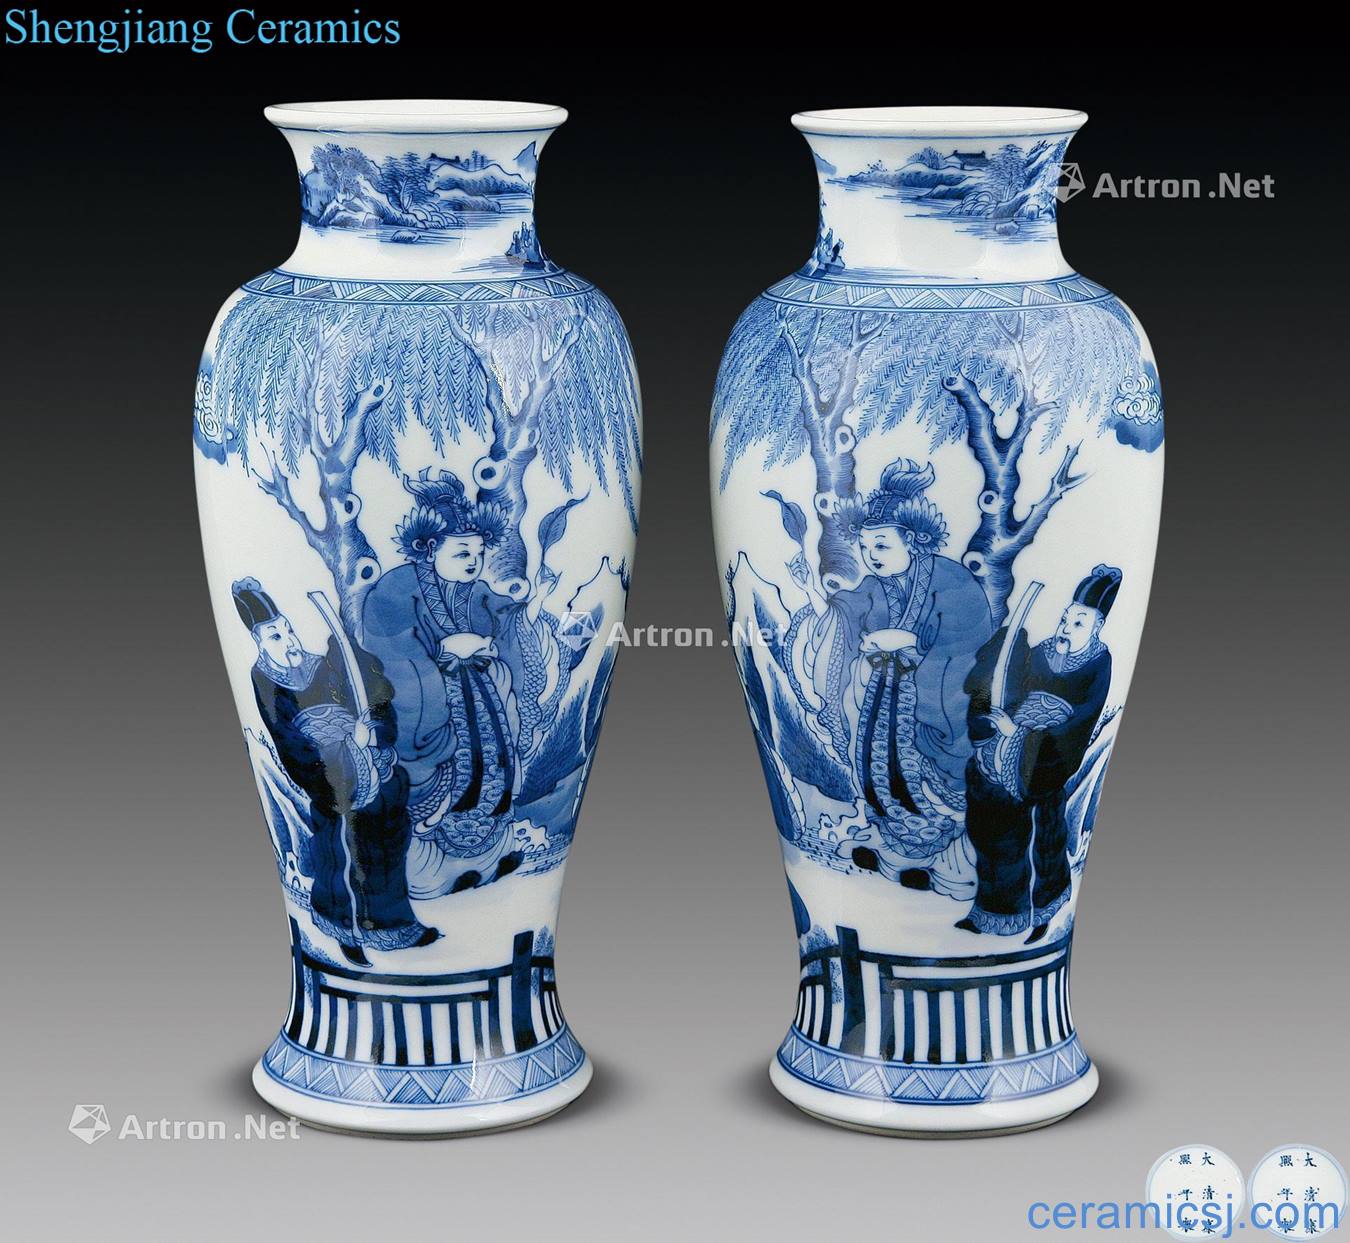 Qing dynasty blue and white figure bottles (a)